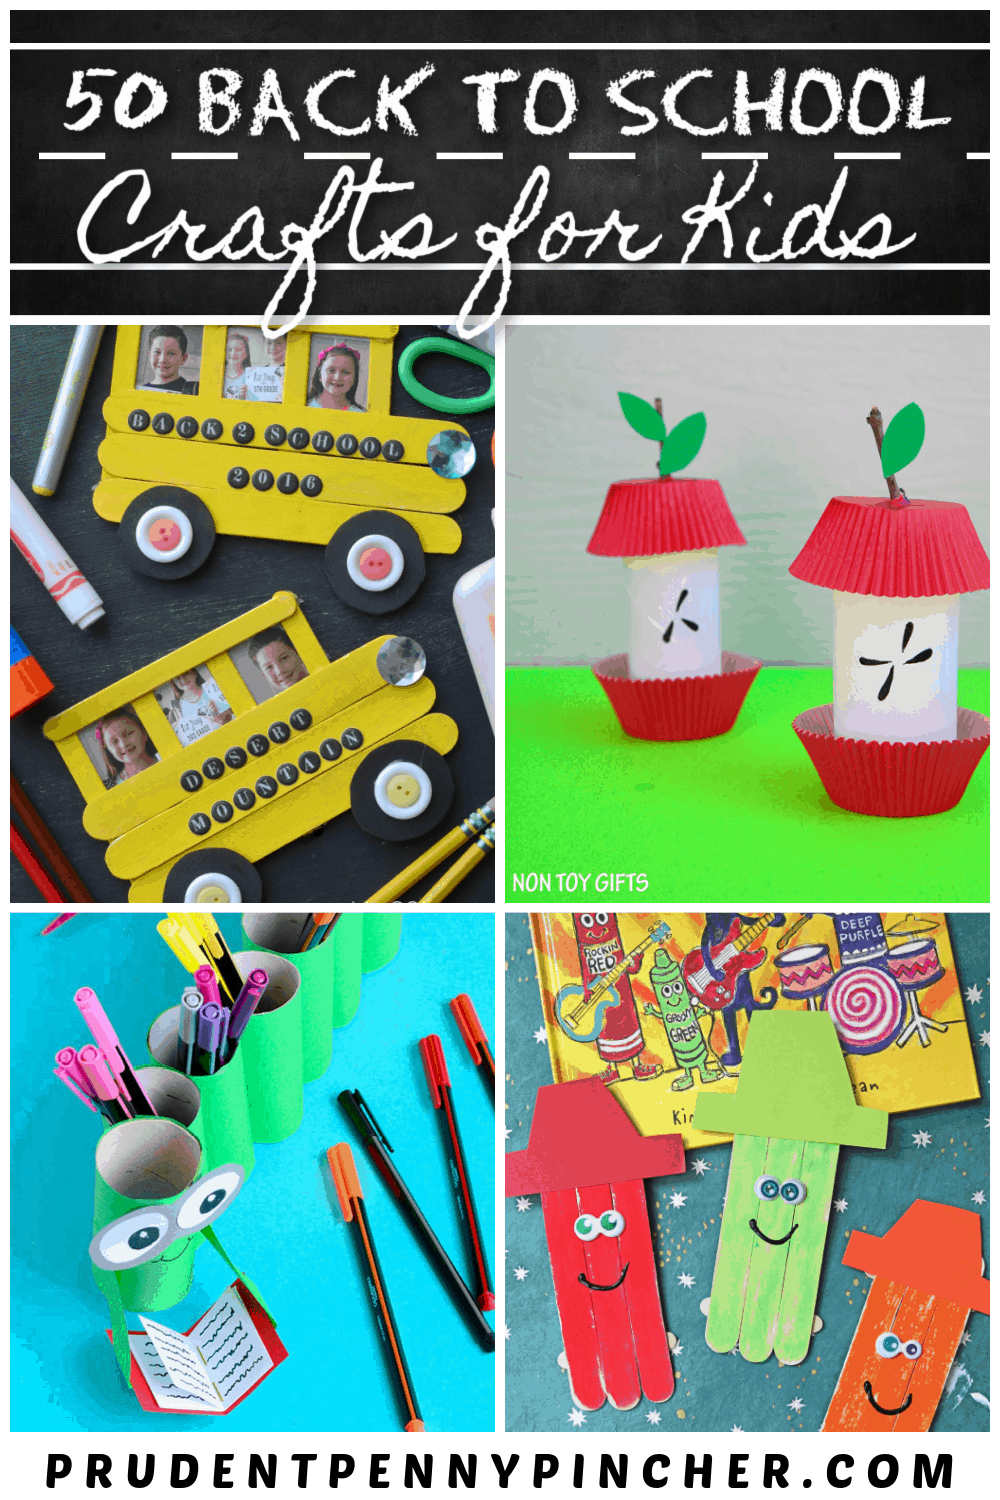 100 Best Fall Crafts for Kids - Prudent Penny Pincher